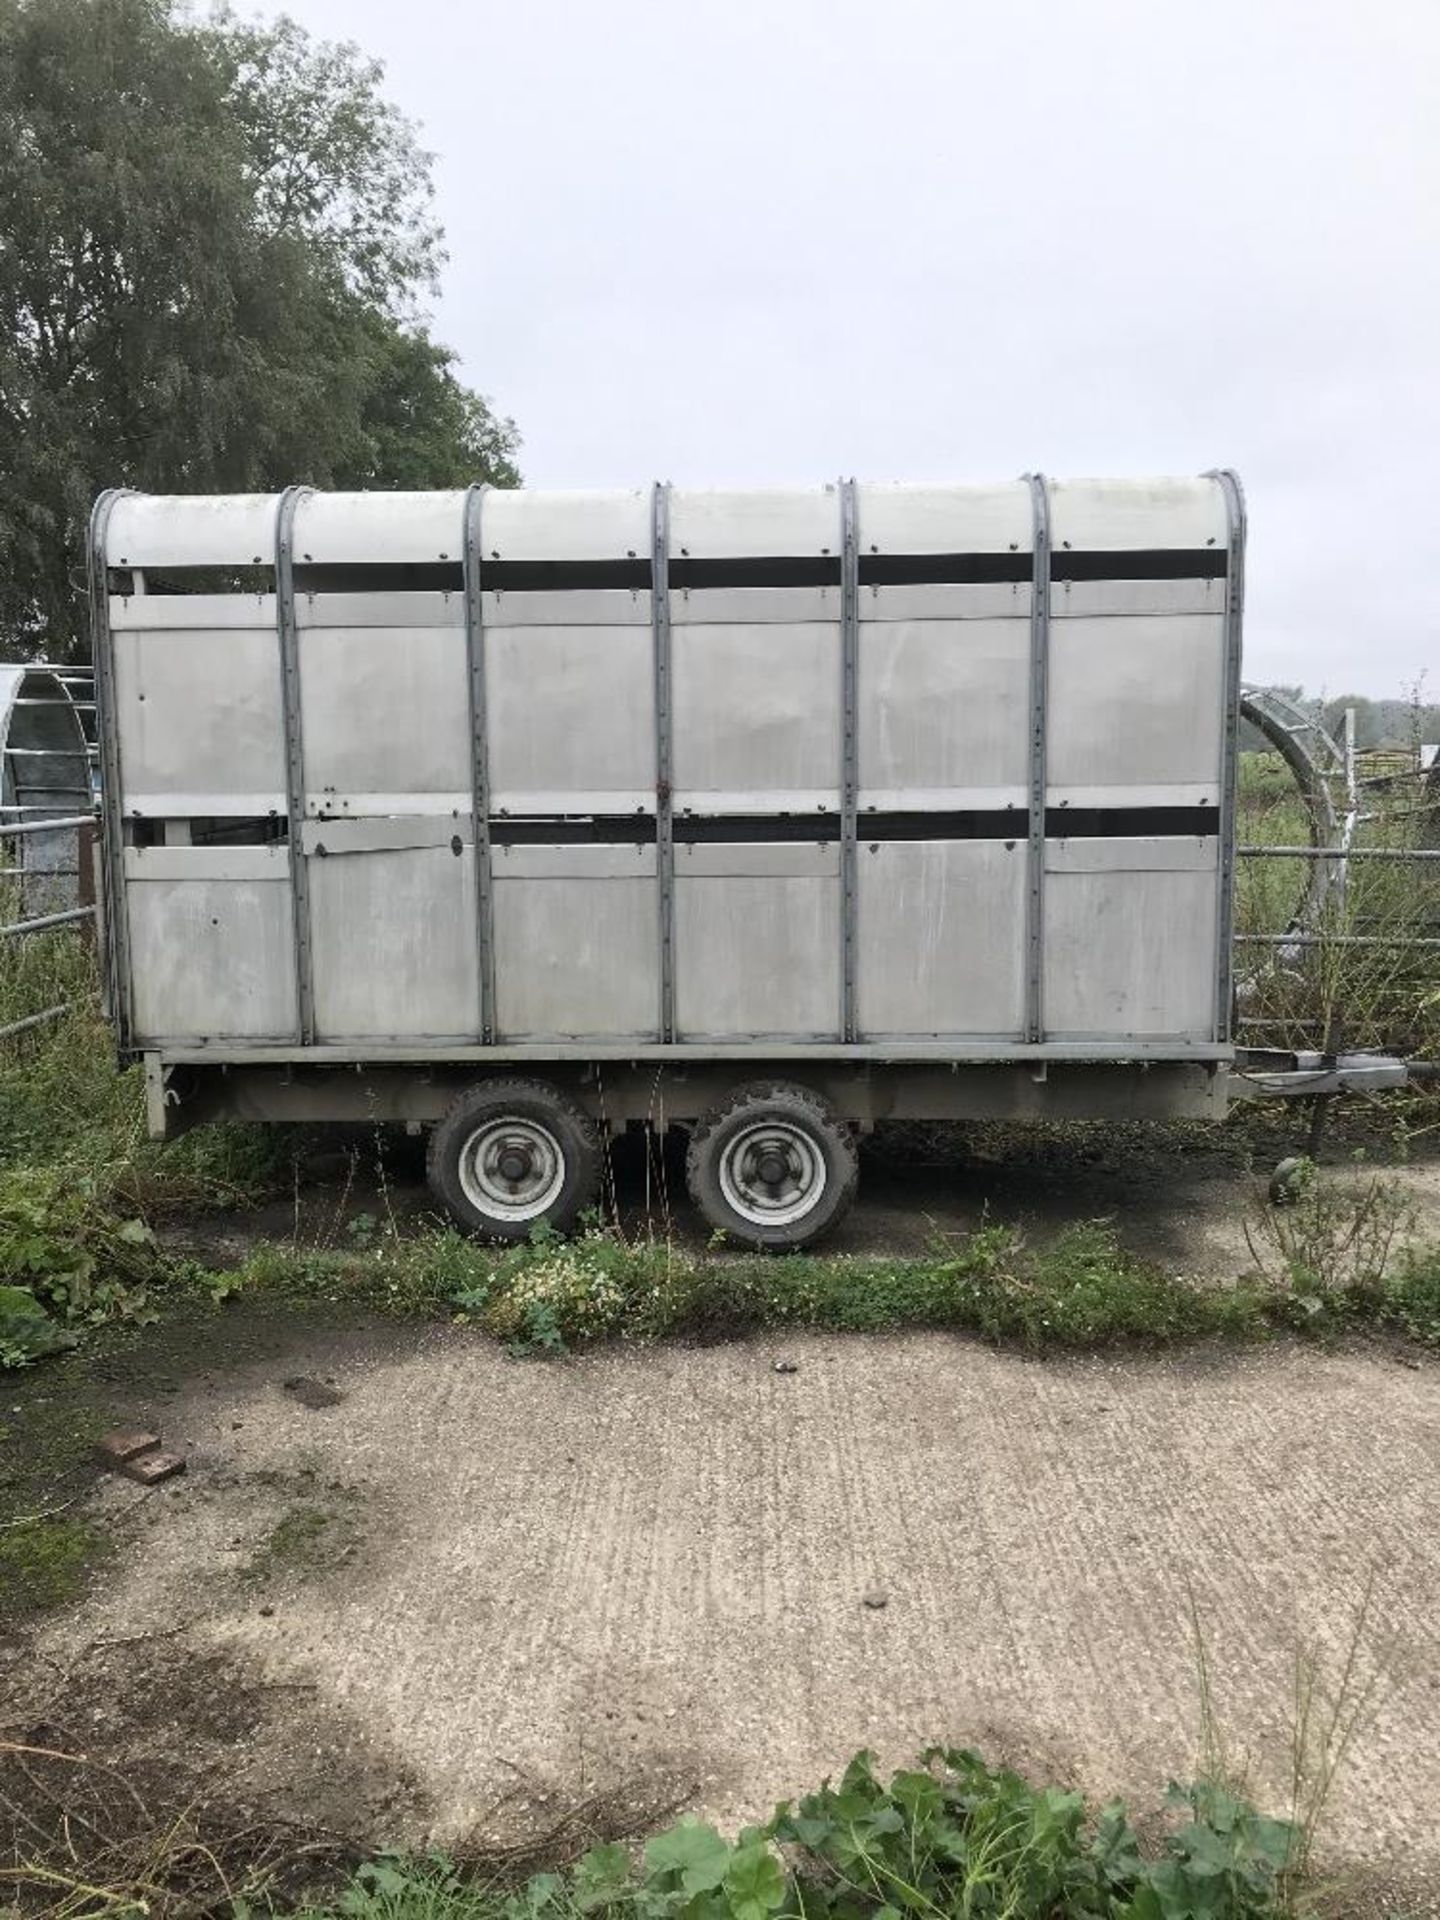 Ifor Williams 12ft x 6ft livestock trailer in very good condition. Stored near Kirby Cane, Bungay.